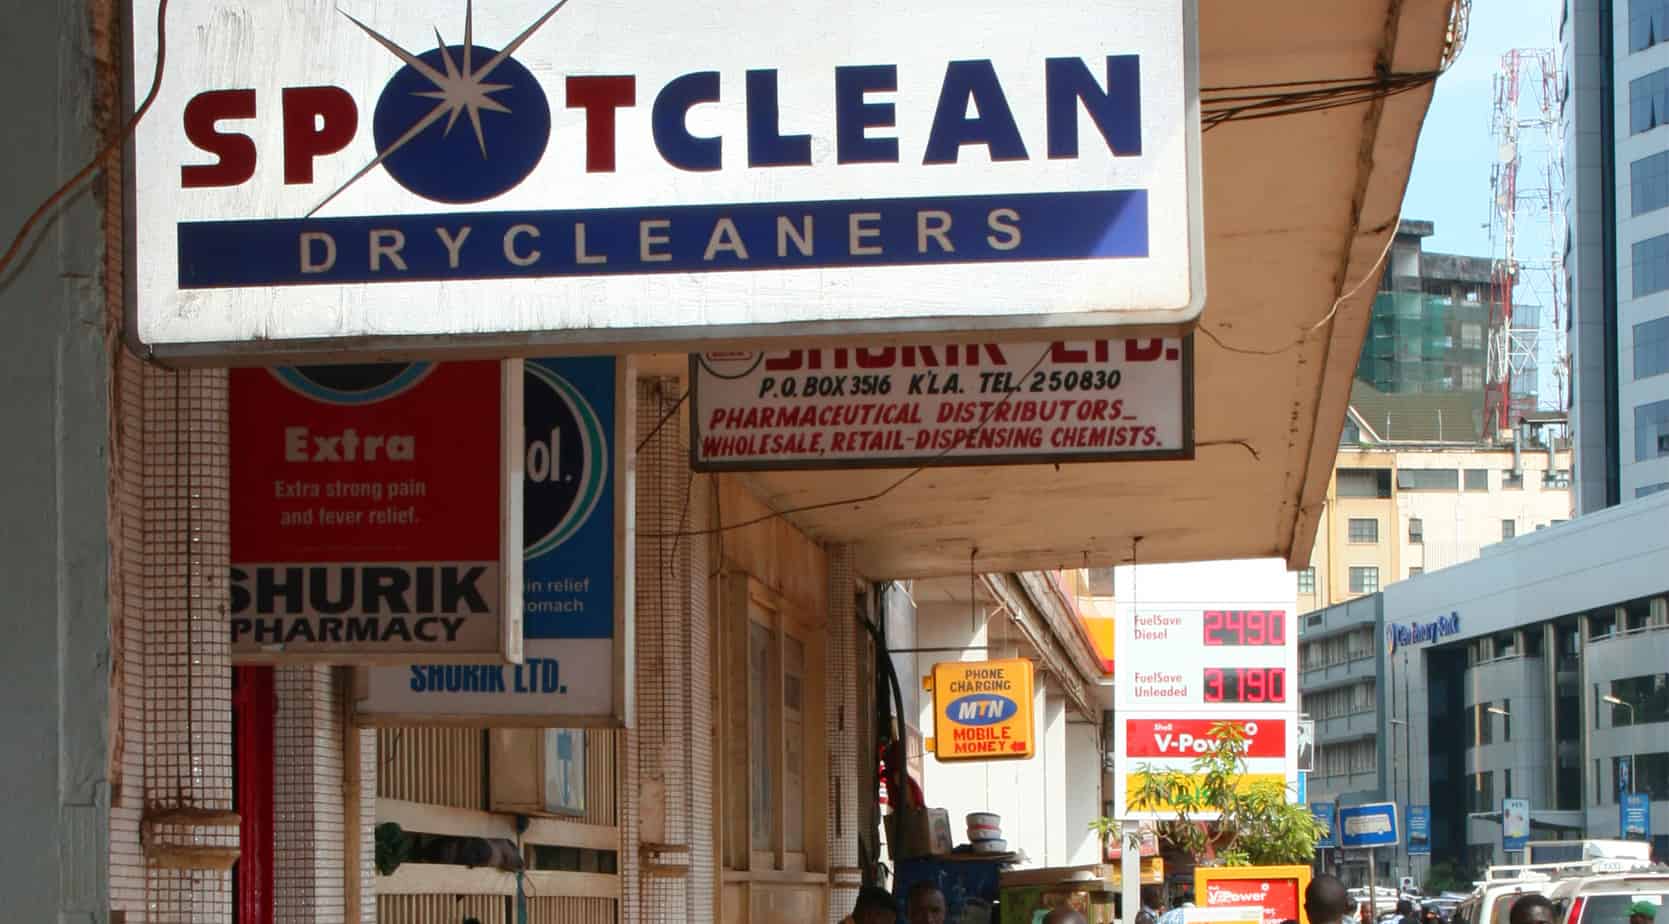 spotclean-dry-cleaners